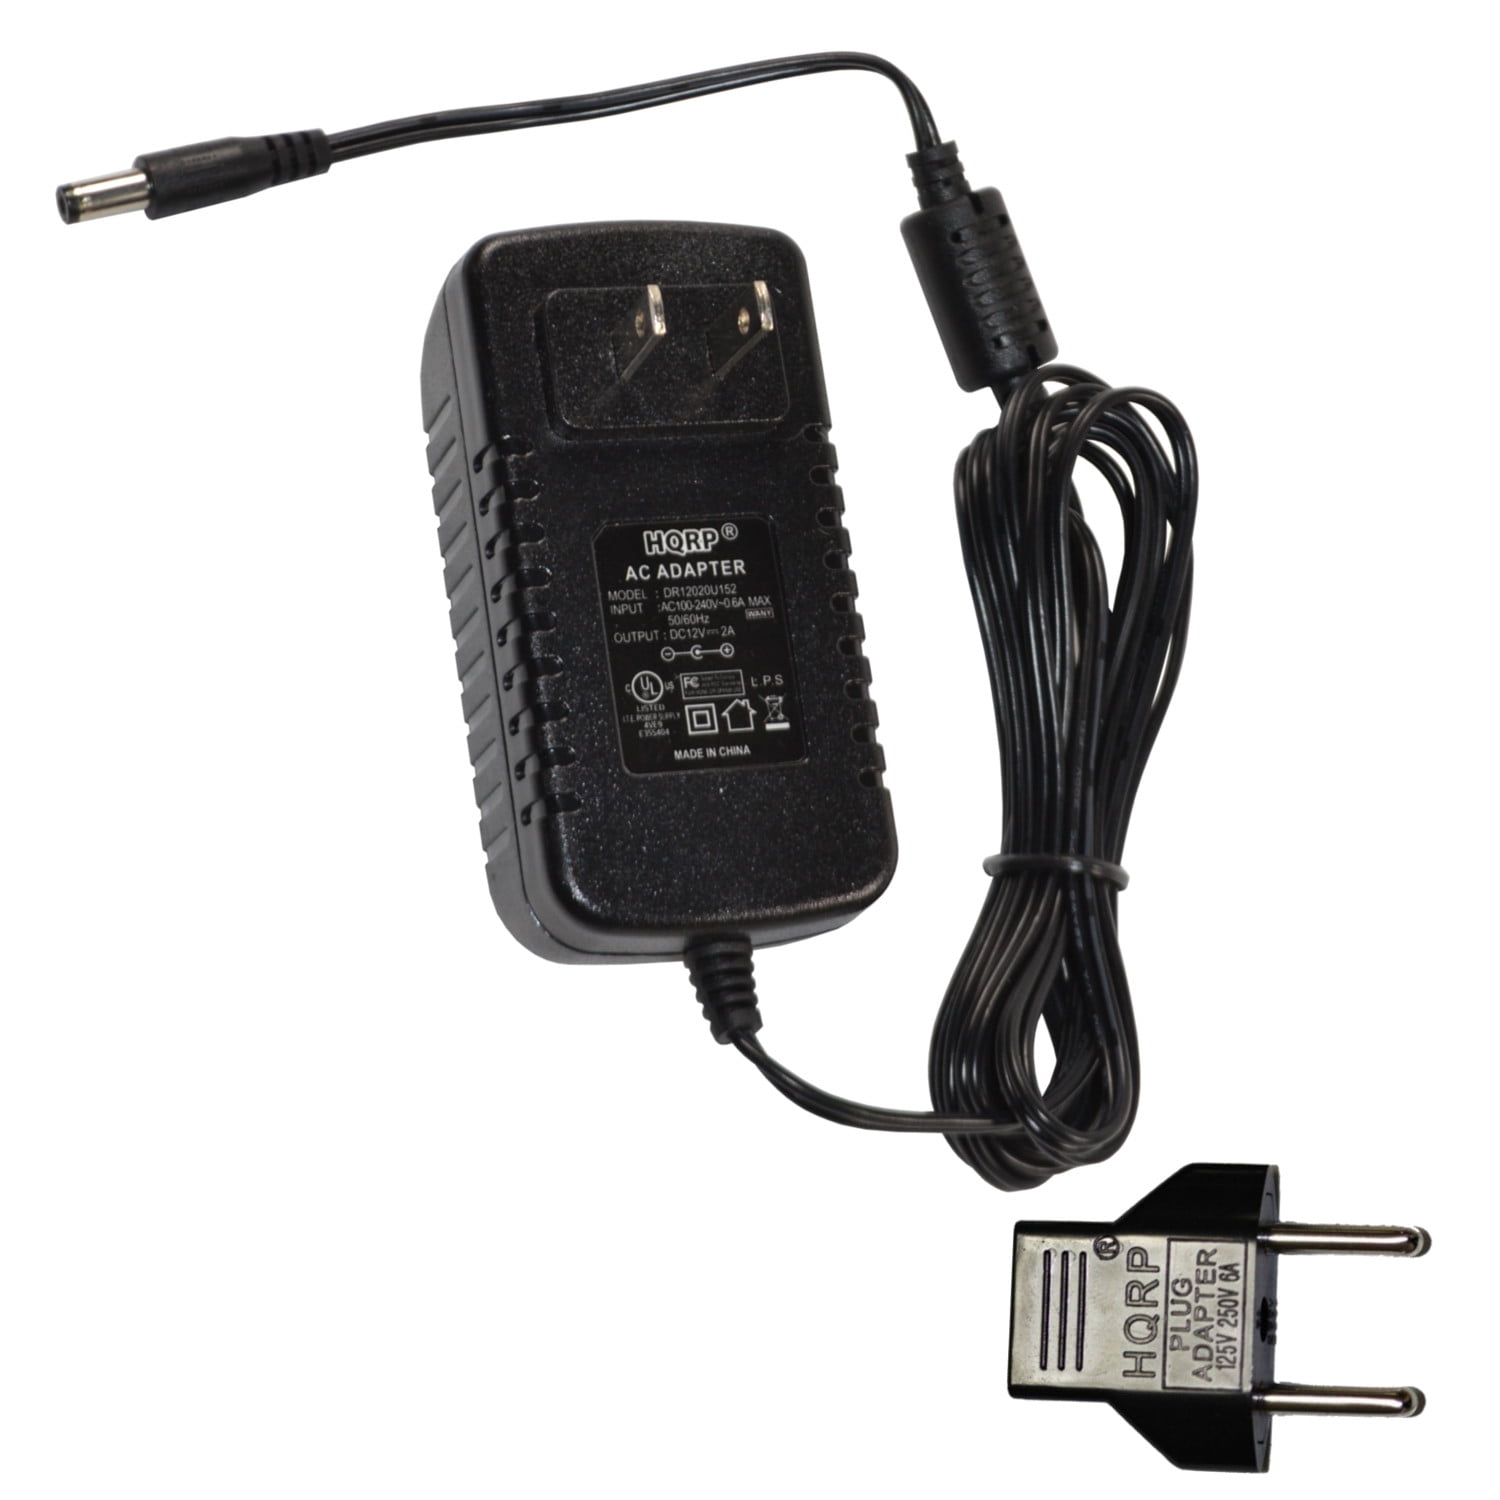 Yamaha Keyboard Power Cord Charger Psr-530 Psr-550 Ypg-225 Ypg225 Ypg-235 Ypg235 